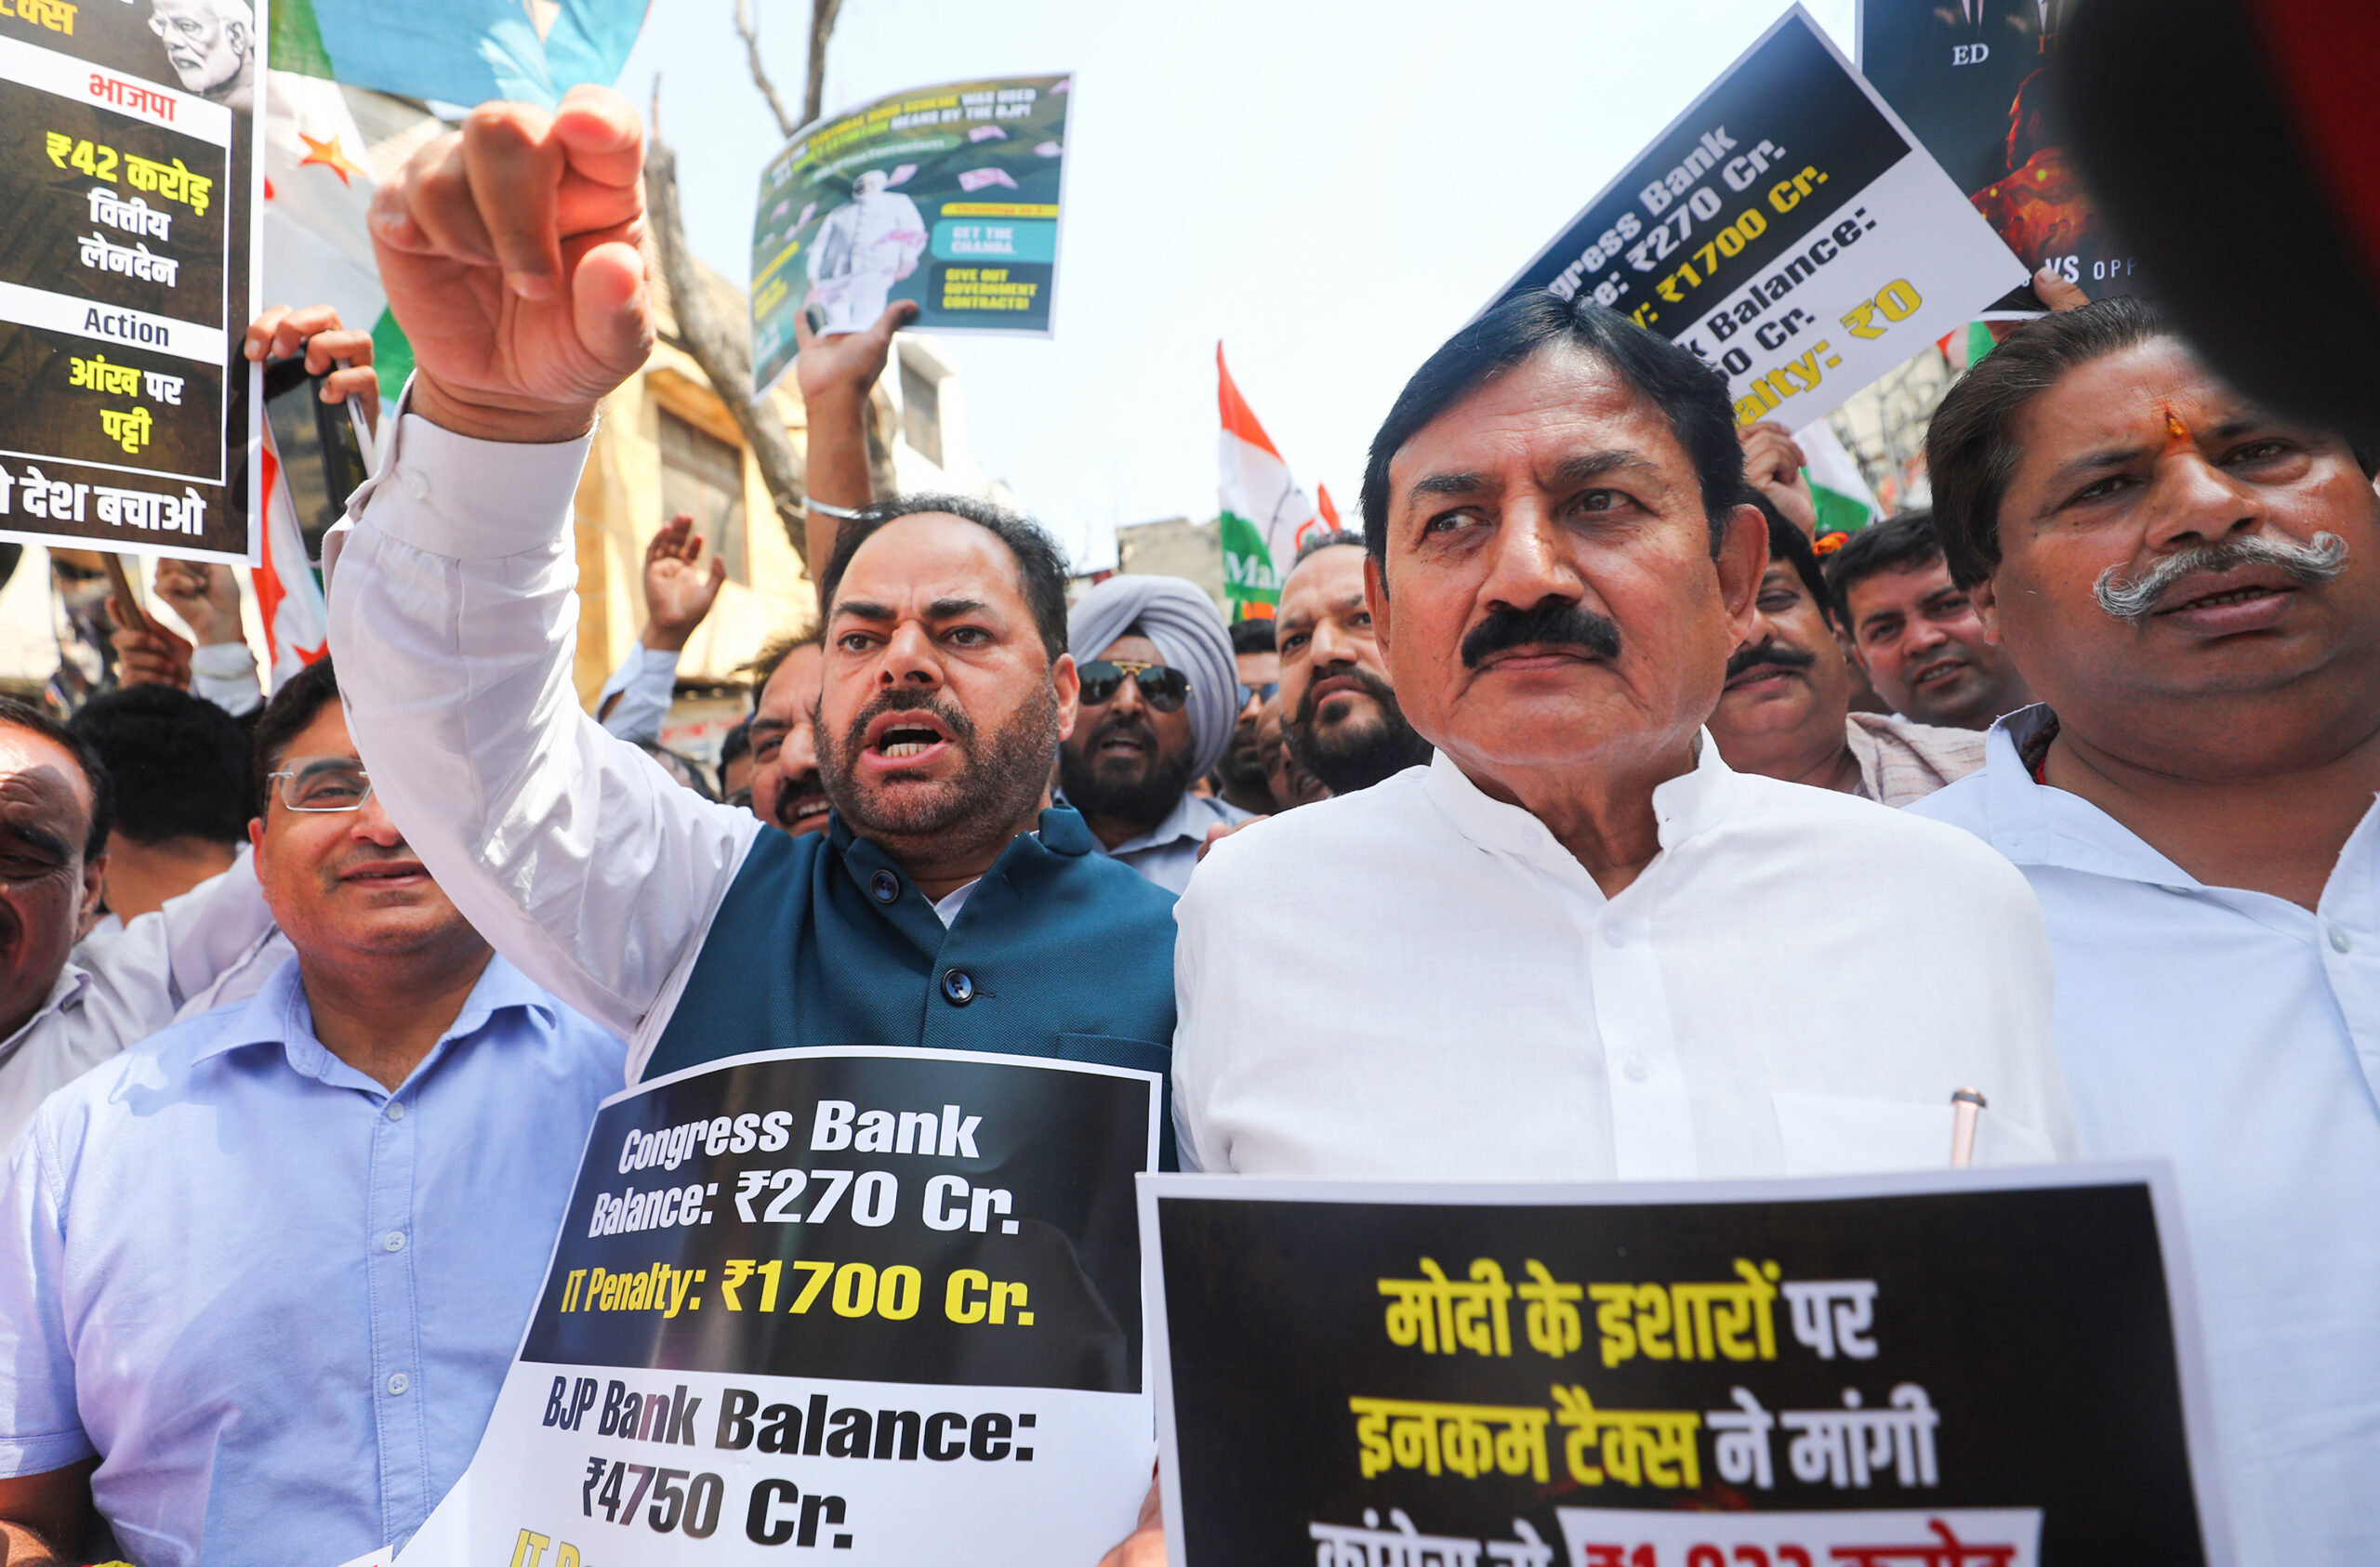 Action Against Opposition Parties: Congress Protests Against BJP In J&K